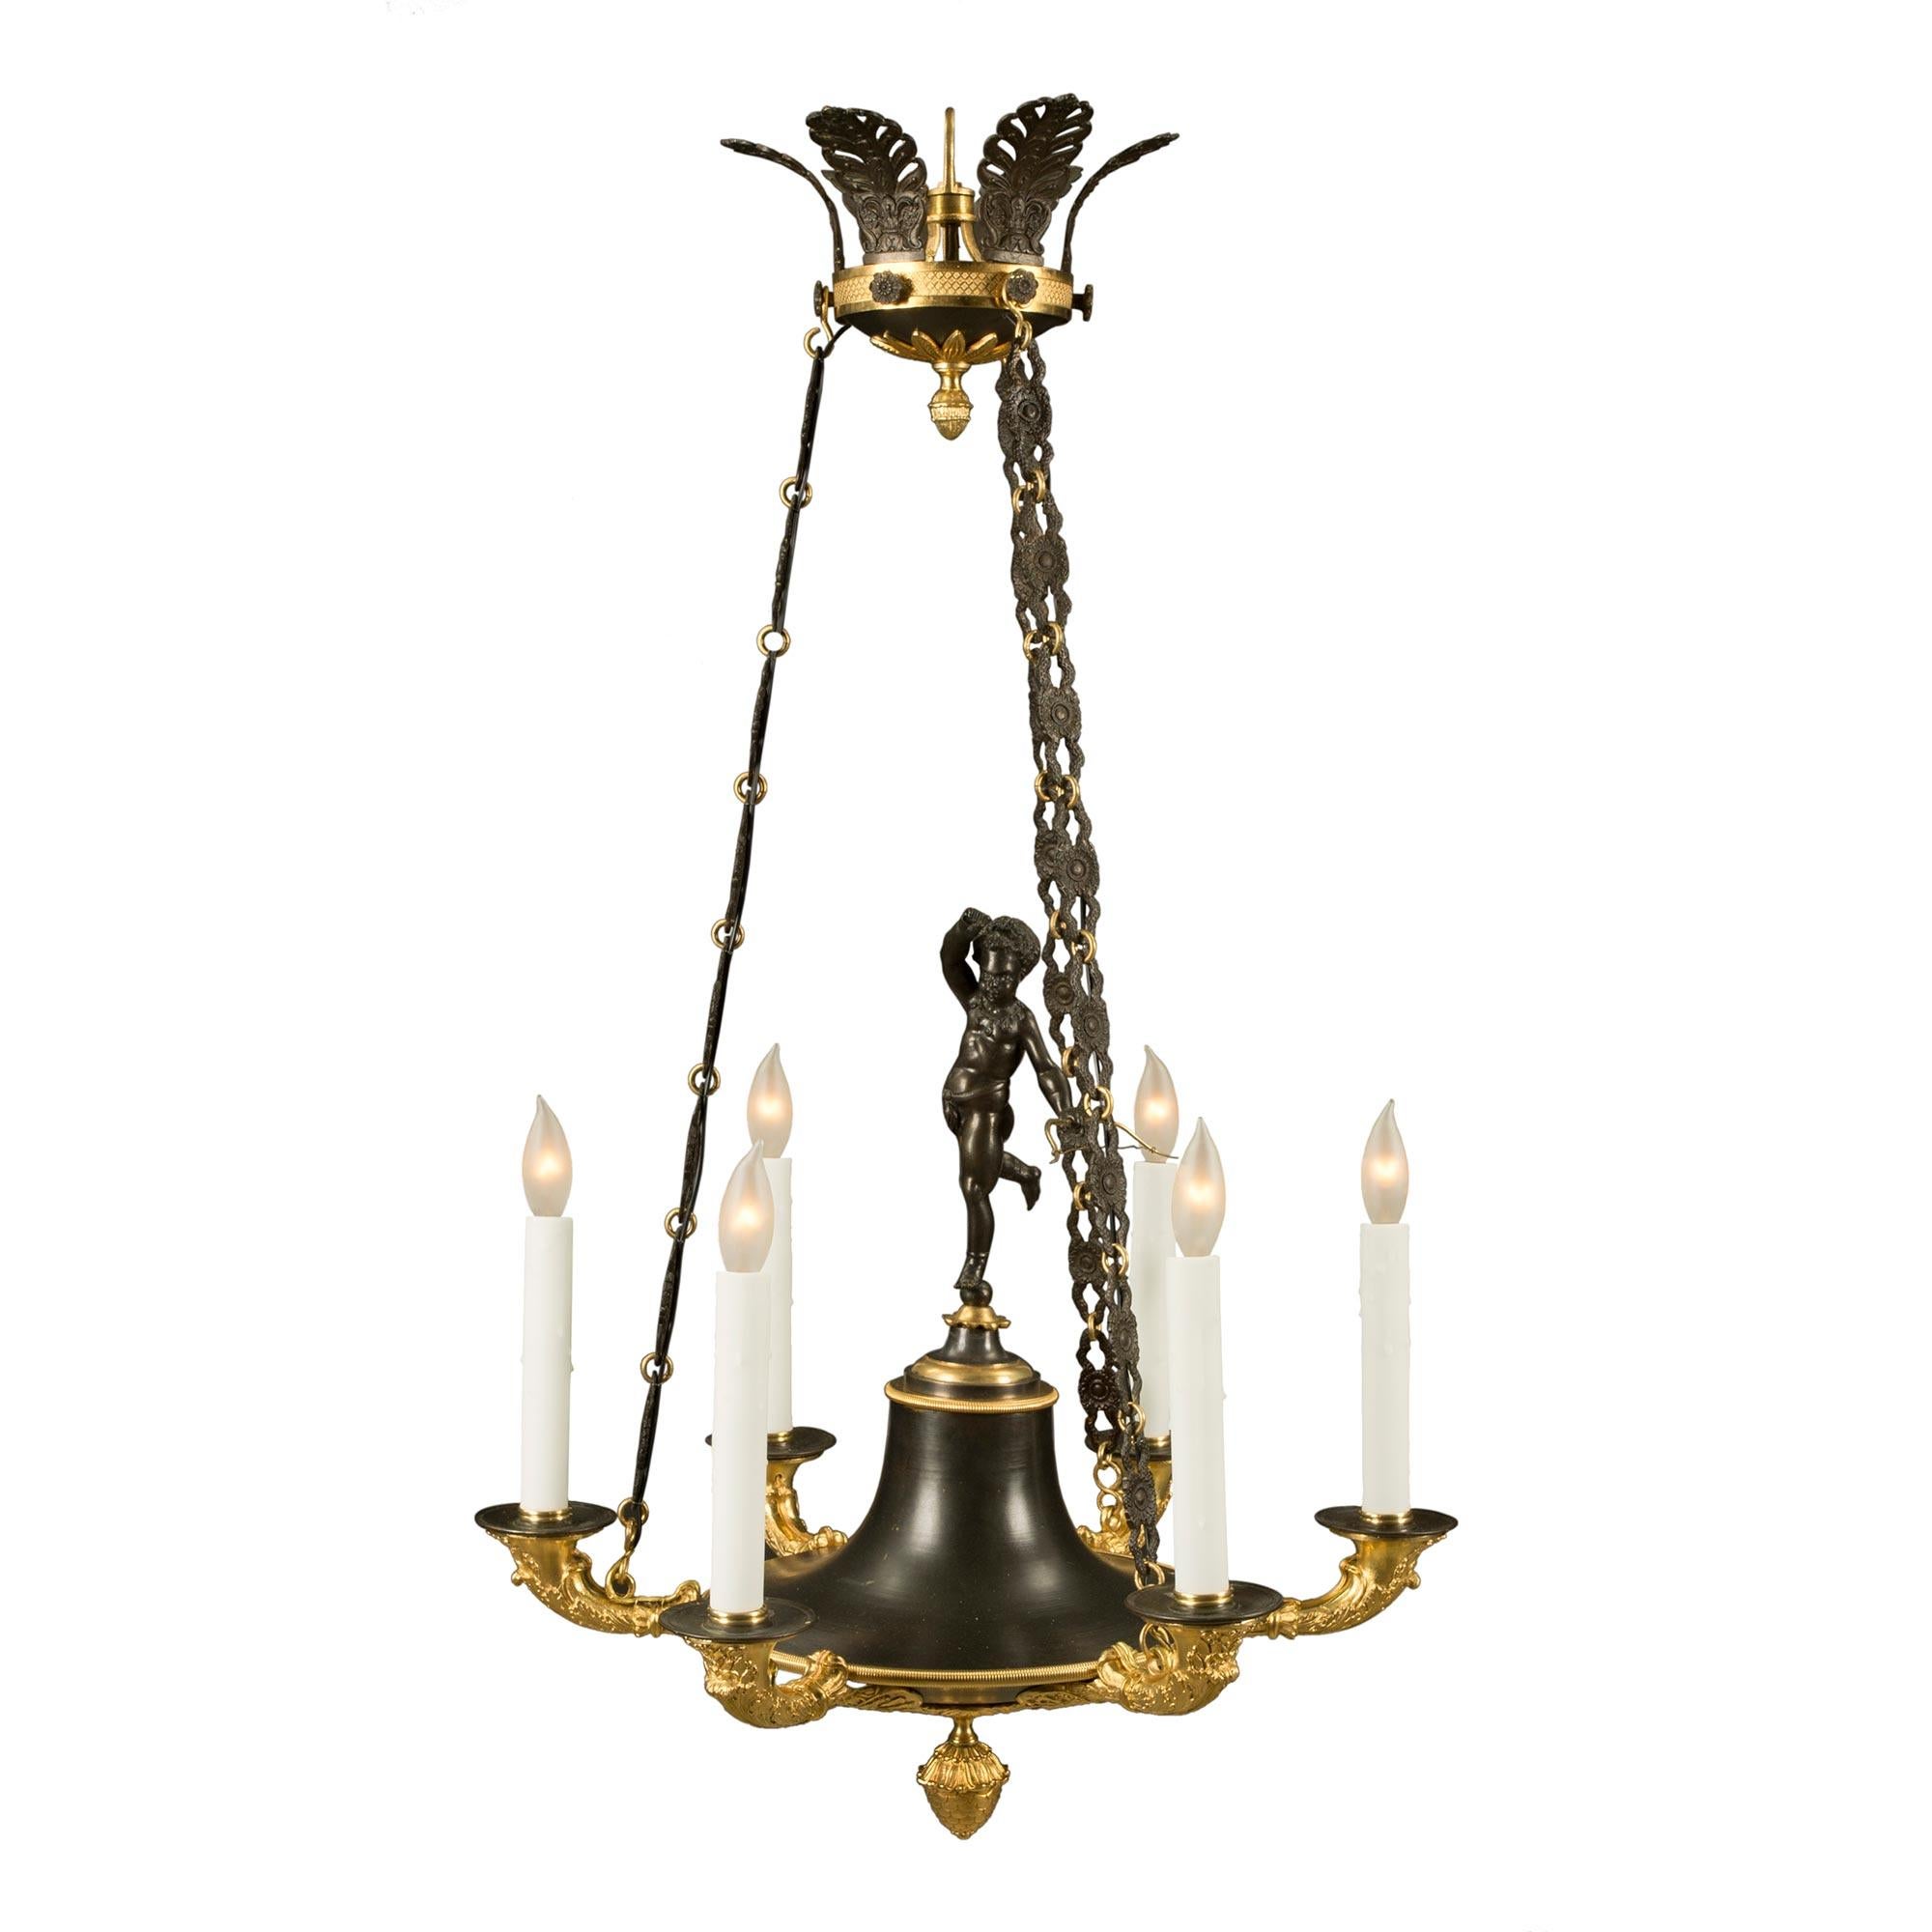 Patinated French 19th Century Neoclassical Style Bronze and Ormolu Chandelier For Sale